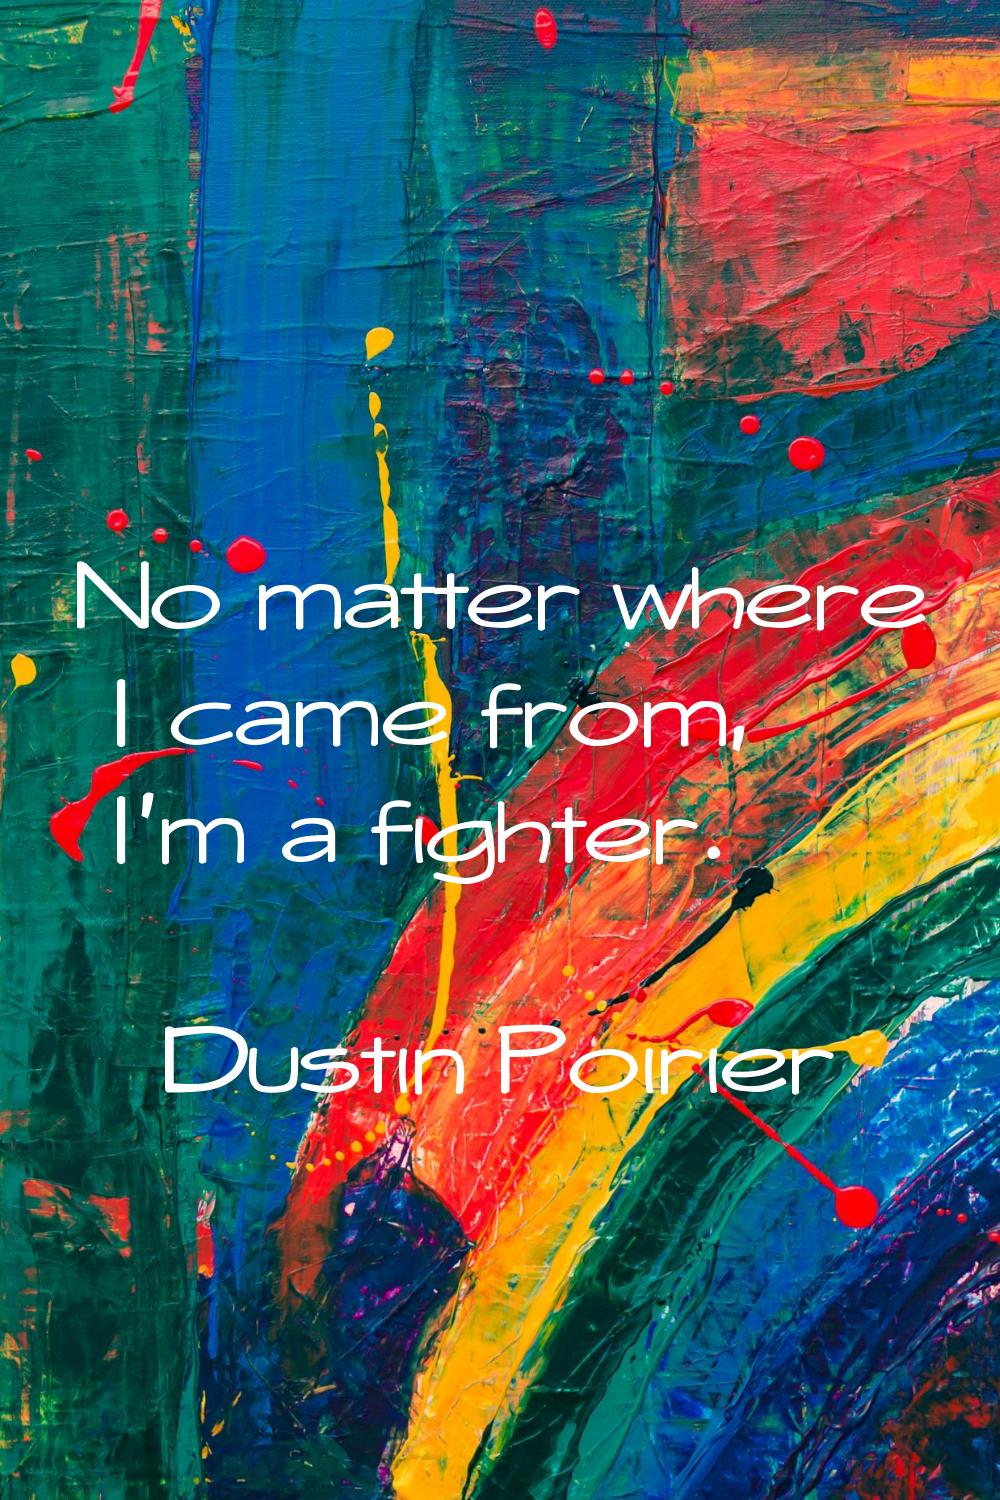 No matter where I came from, I'm a fighter.